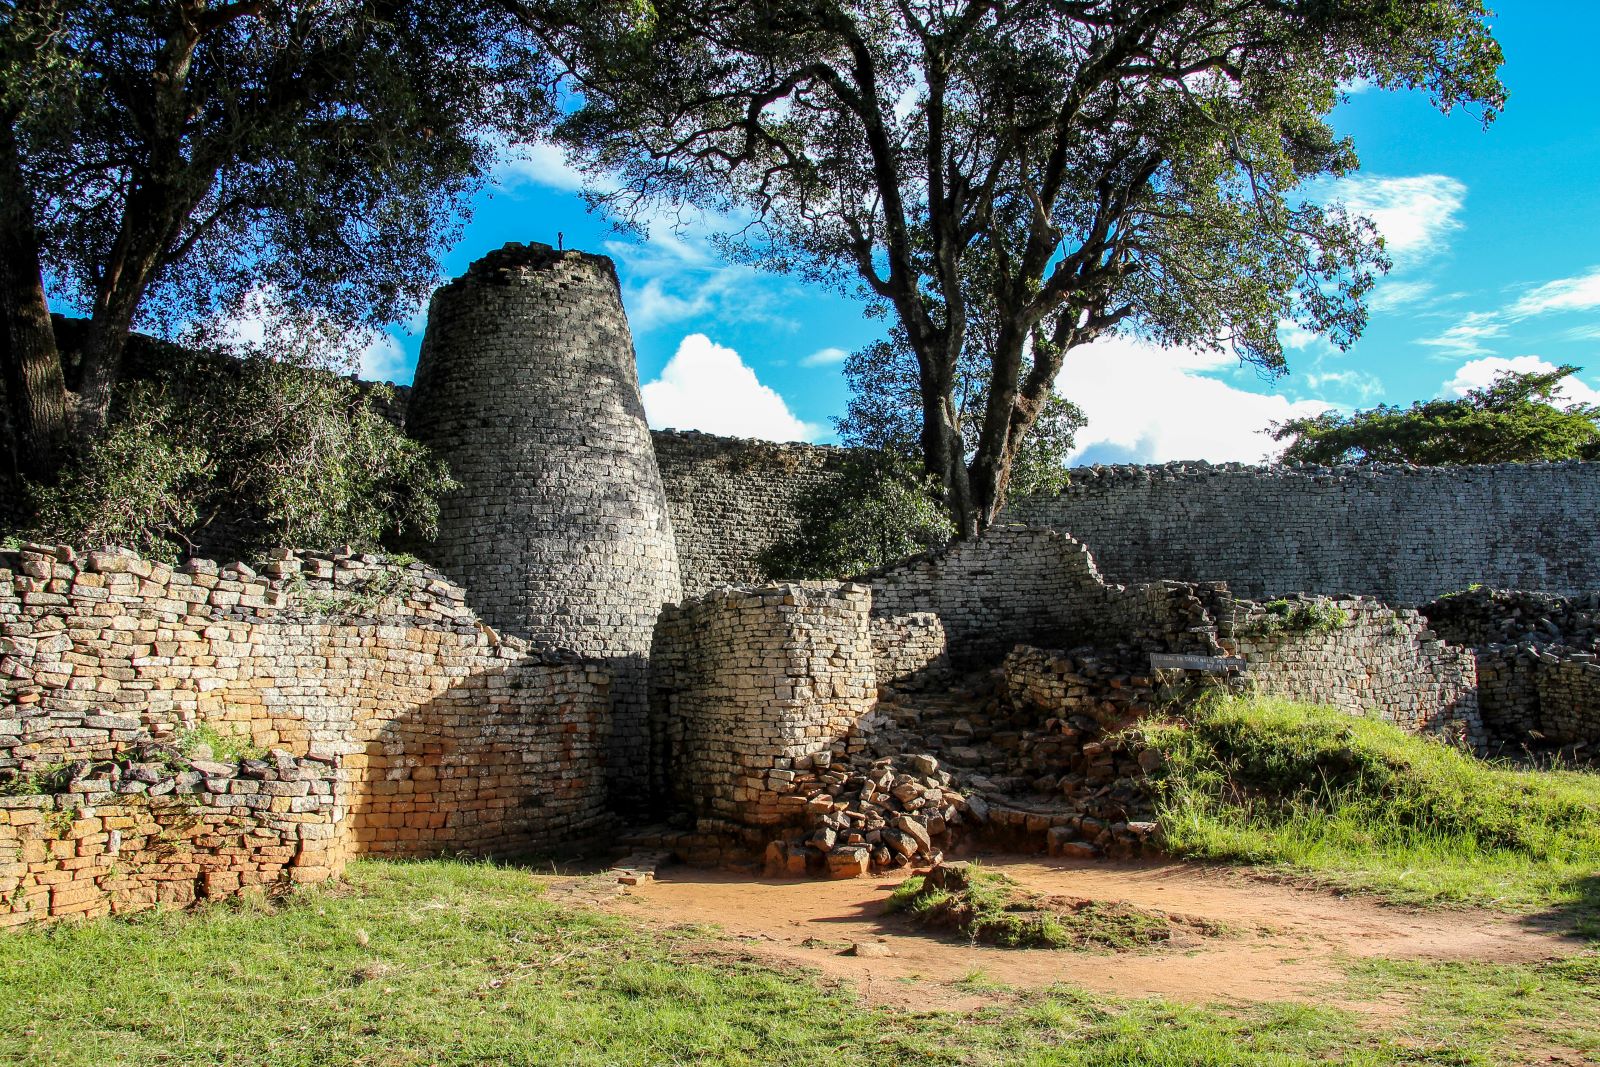 Exterior view of the Great Zimbabwe ruins